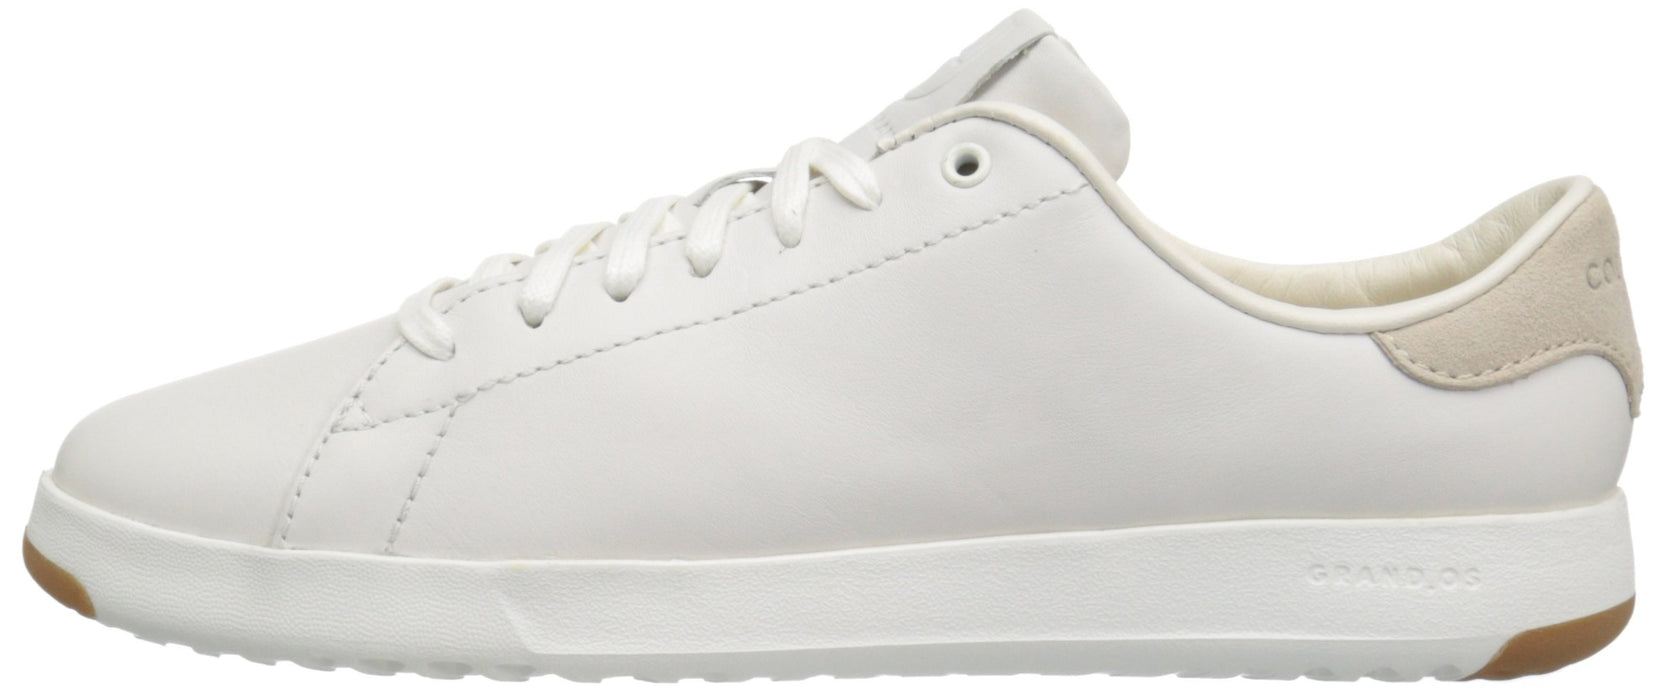 Cole Haan Women's Grandpro Tennis Leather Lace Ox Fashion Shoes.